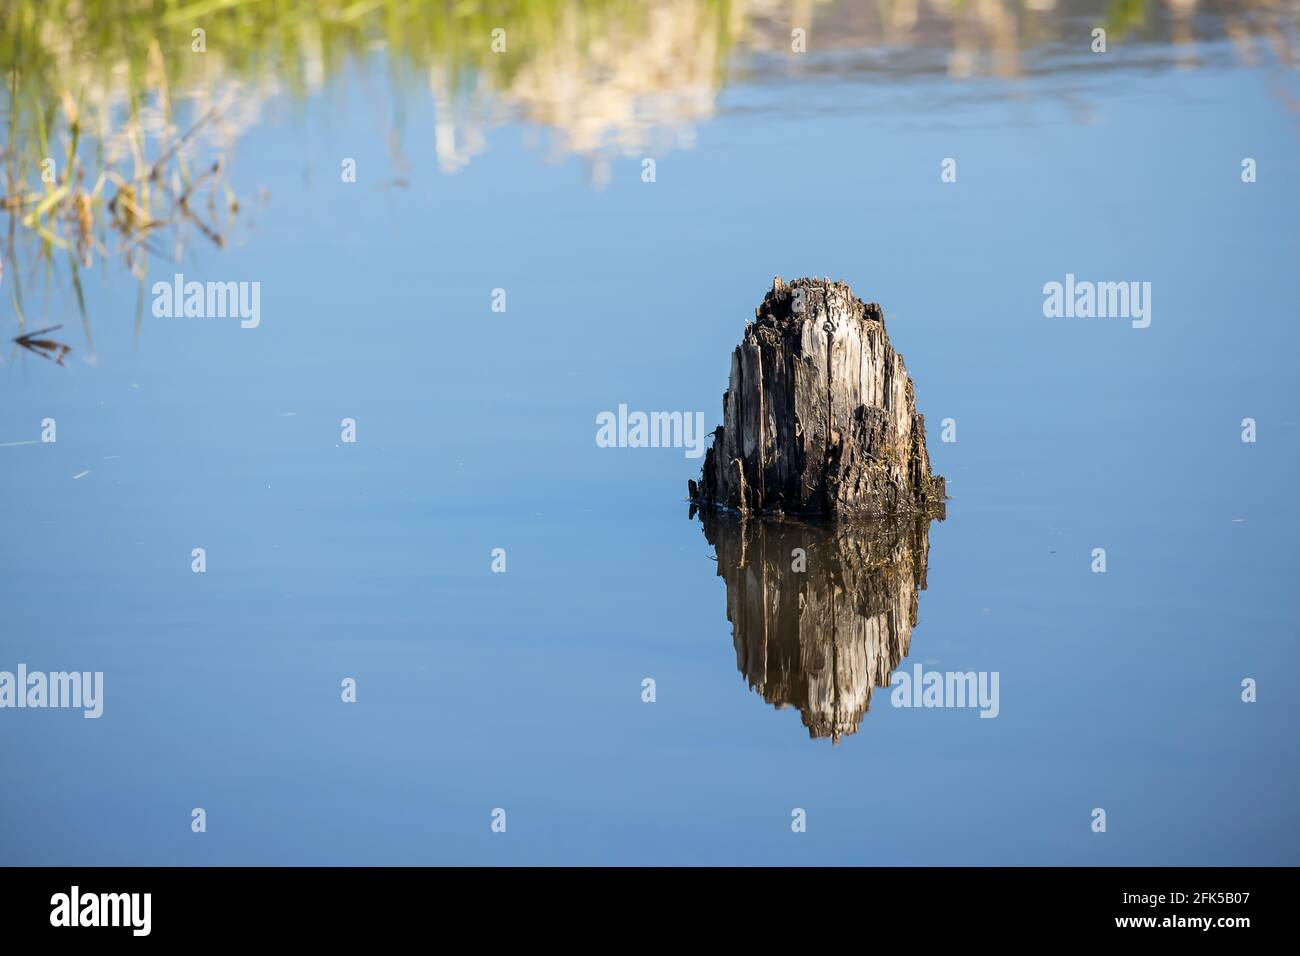 An abstract photo of a wooden stump in calm water wasting a mirror like reflection near Clark, Fork, Idaho. Stock Photo